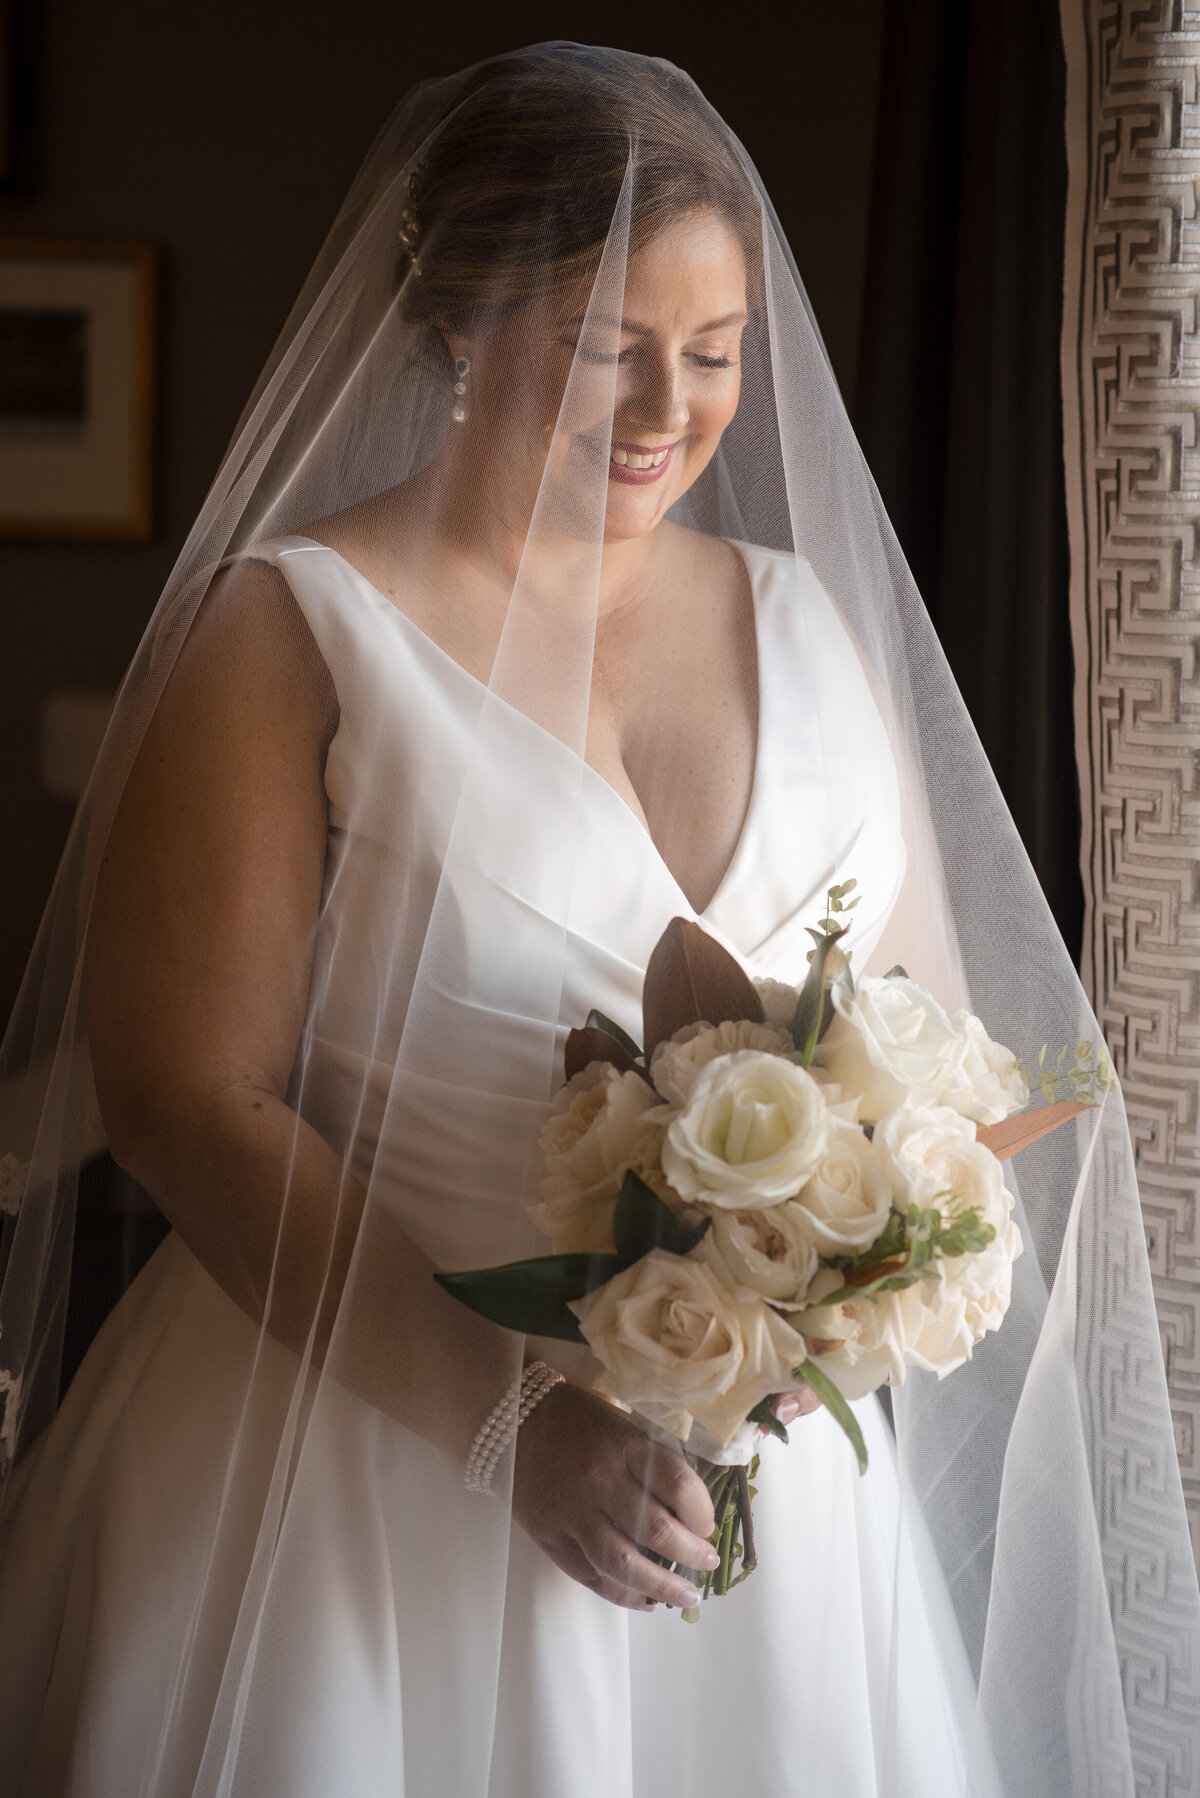 Bridal portrait where the bride has her veil over her face and she's looking down smiling at her flowers at the Ballantyne by Charlotte wedding photographers DeLong Photography